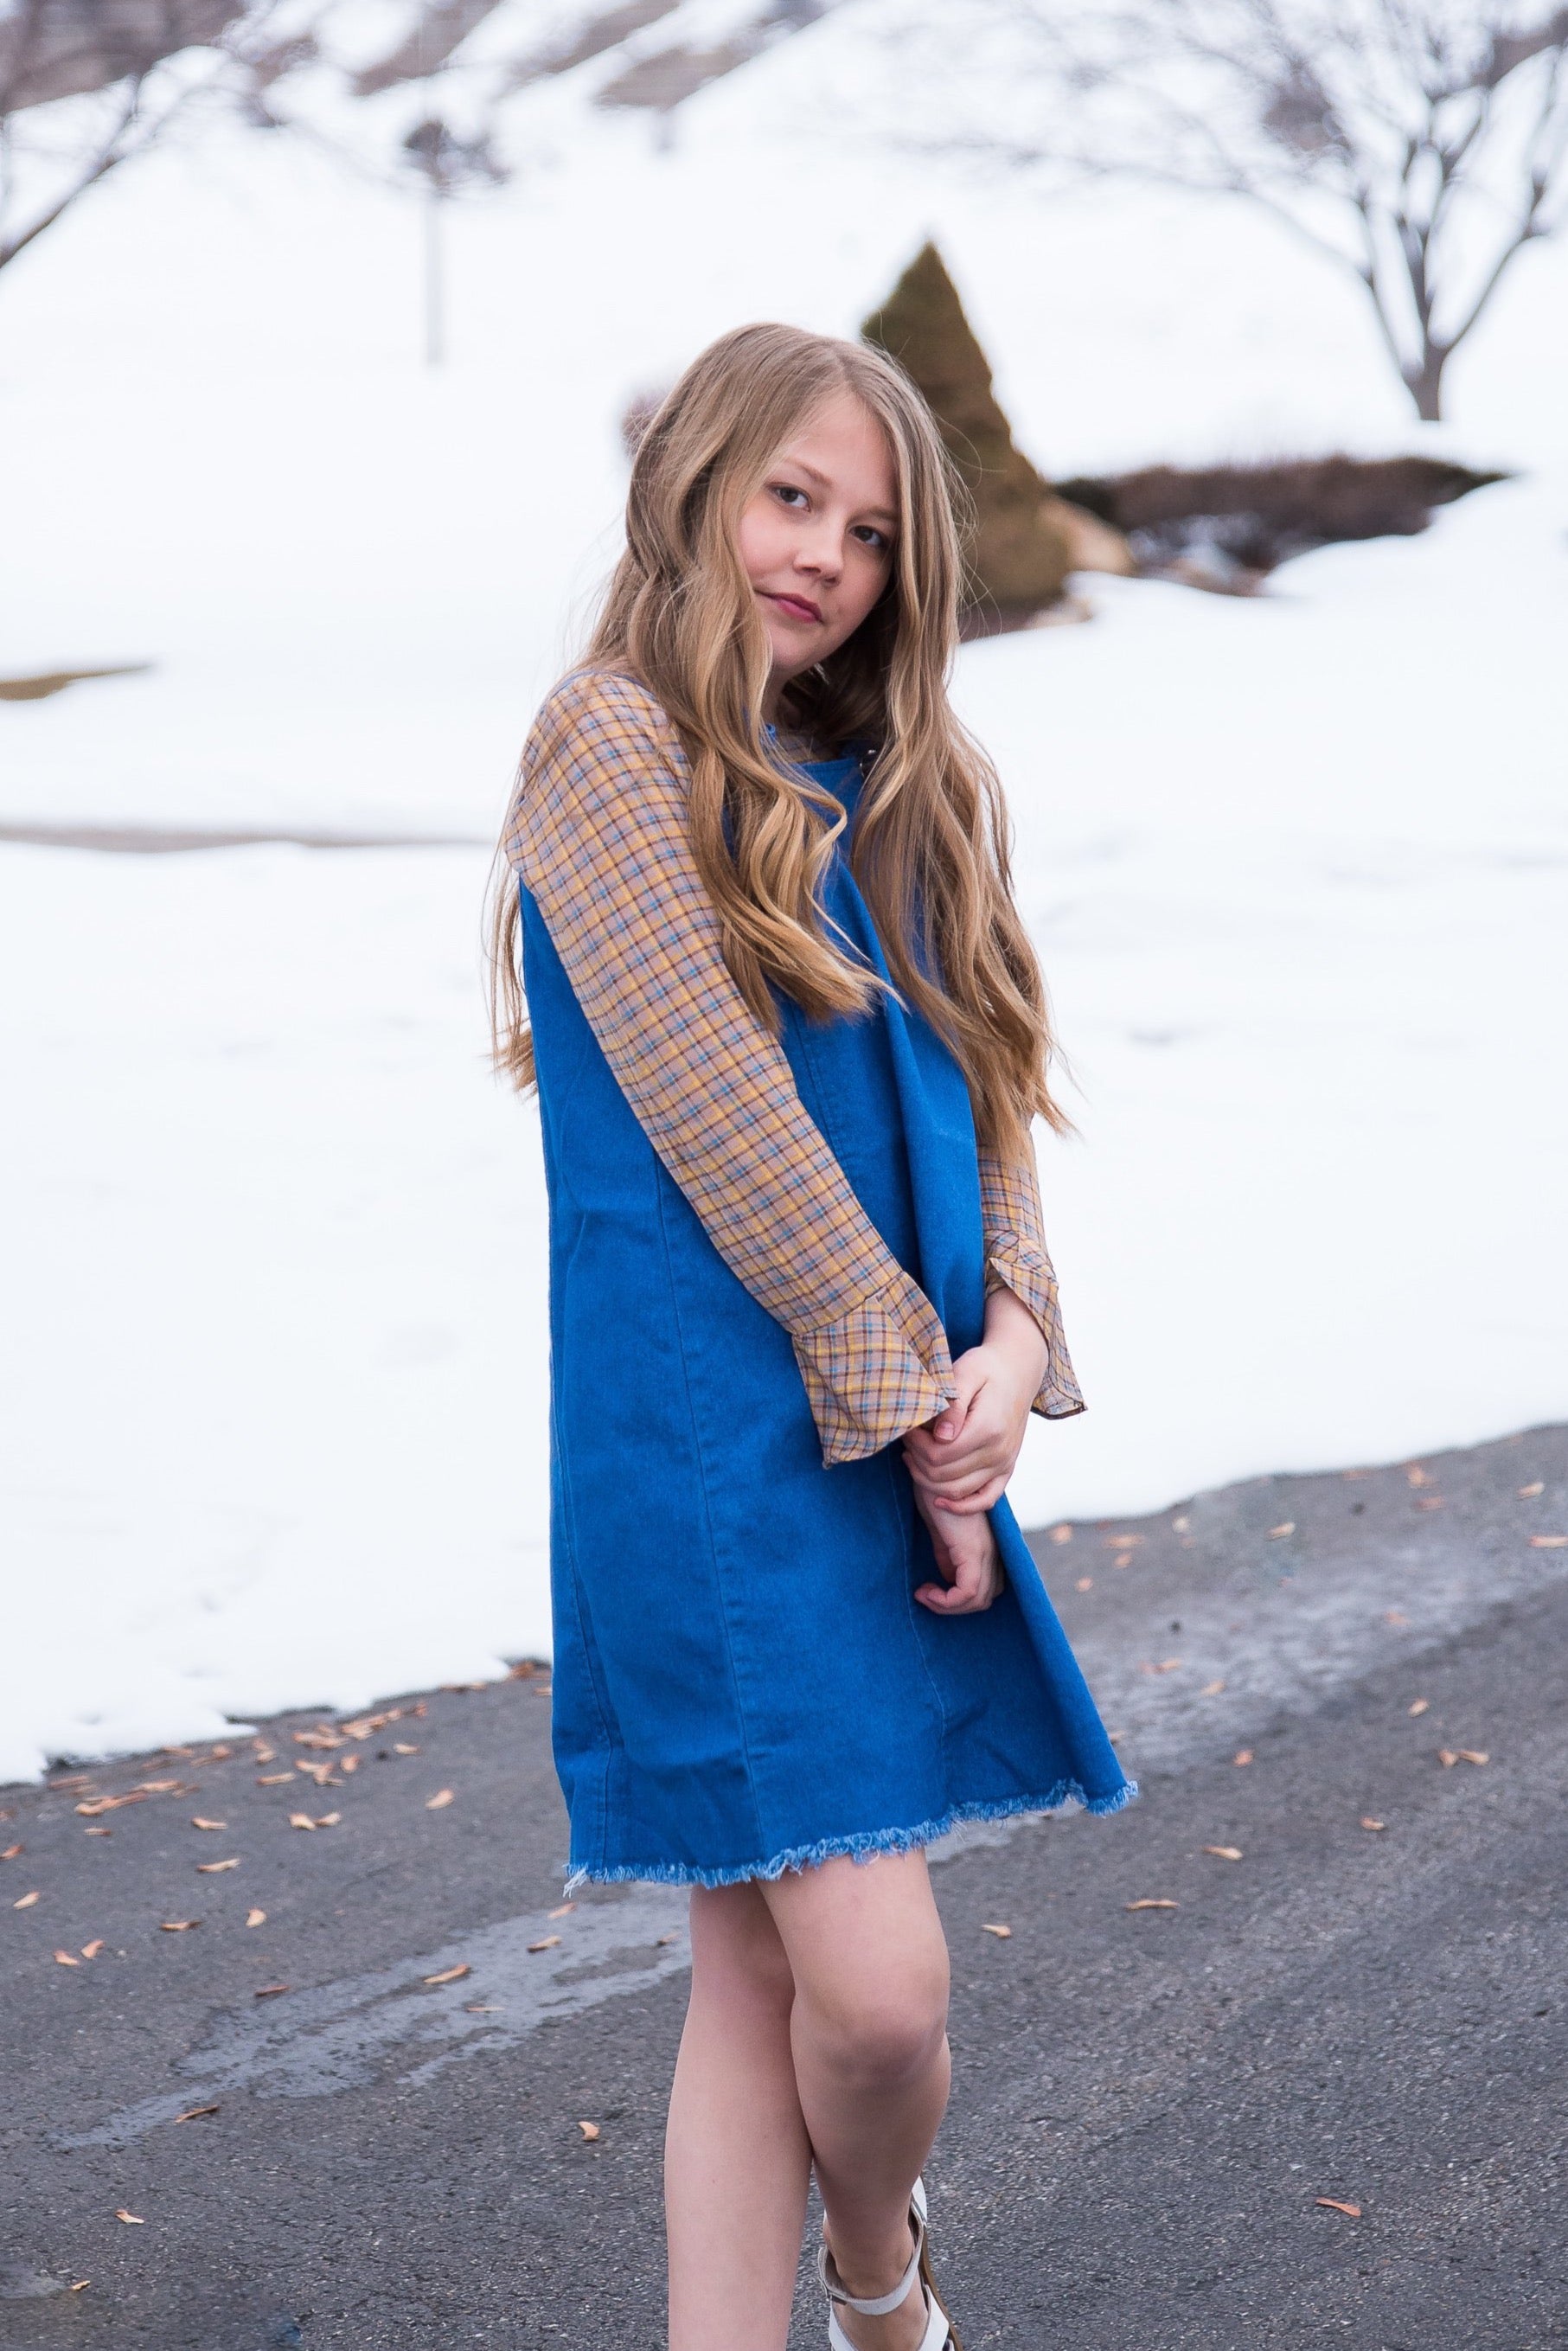 Chic Long-Sleeve Denim Dress for Girls – Cute Color-Block Style with 1